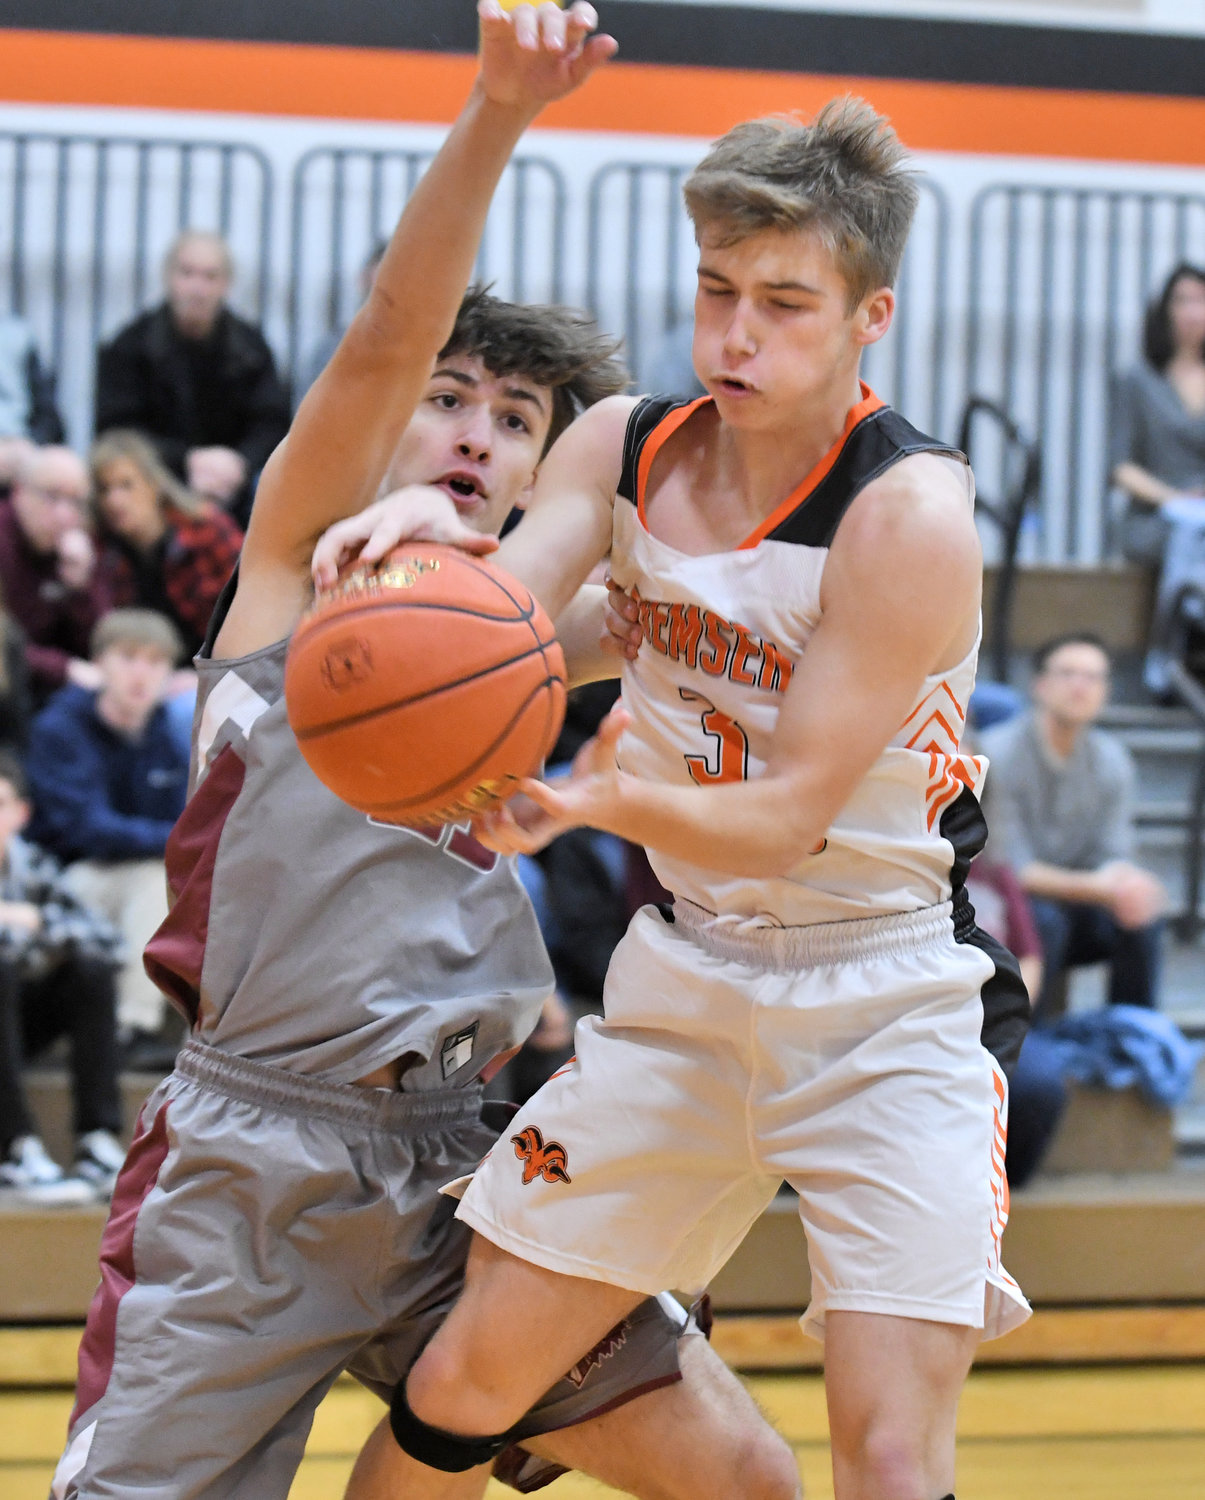 Remsen’s Grady Helmer is guarded by Oriskany’s Karsten Bates in a game in Remsen Thursday. Helmer led the Rams with 18 points but Oriskany won 48-42.